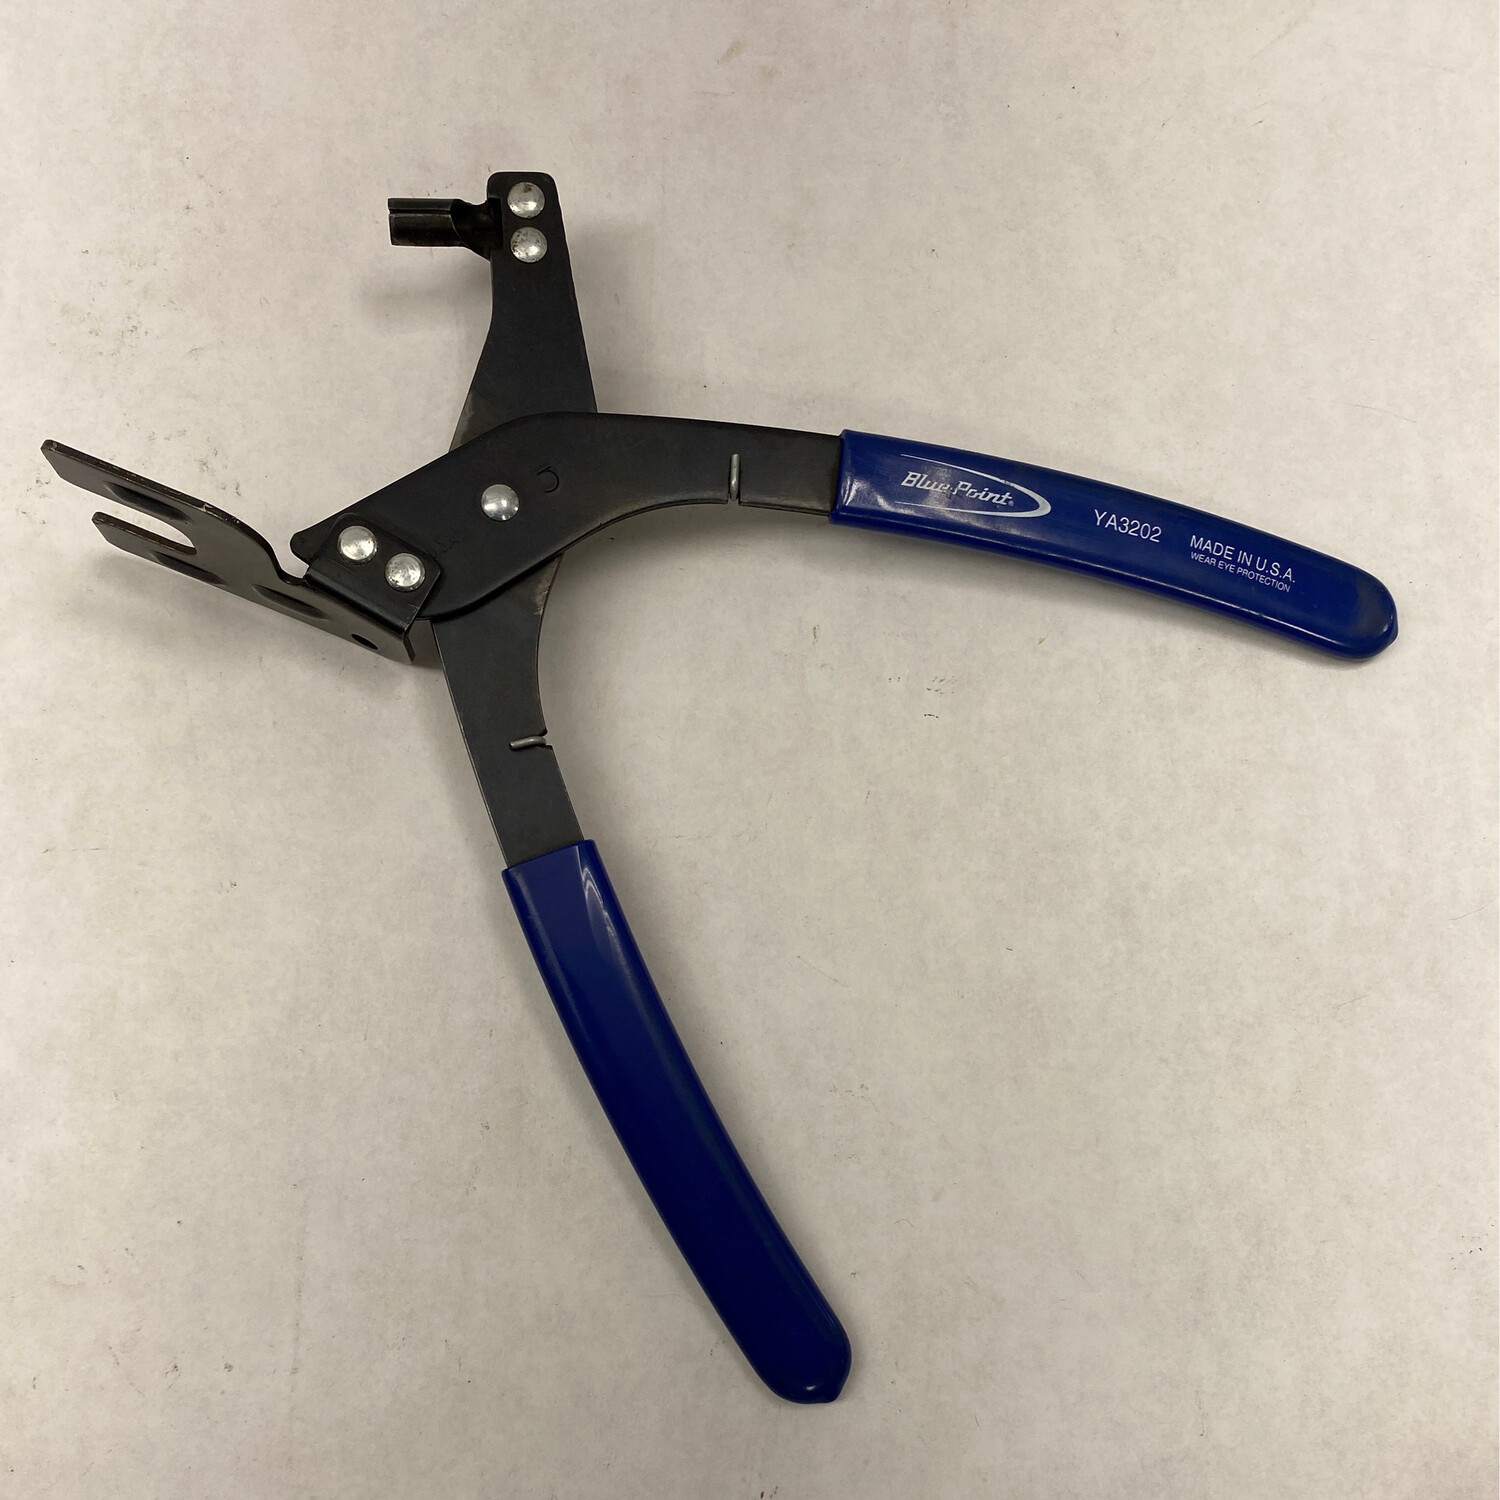 Blue Point Exhaust Hanger Remover Pliers, Ya3202